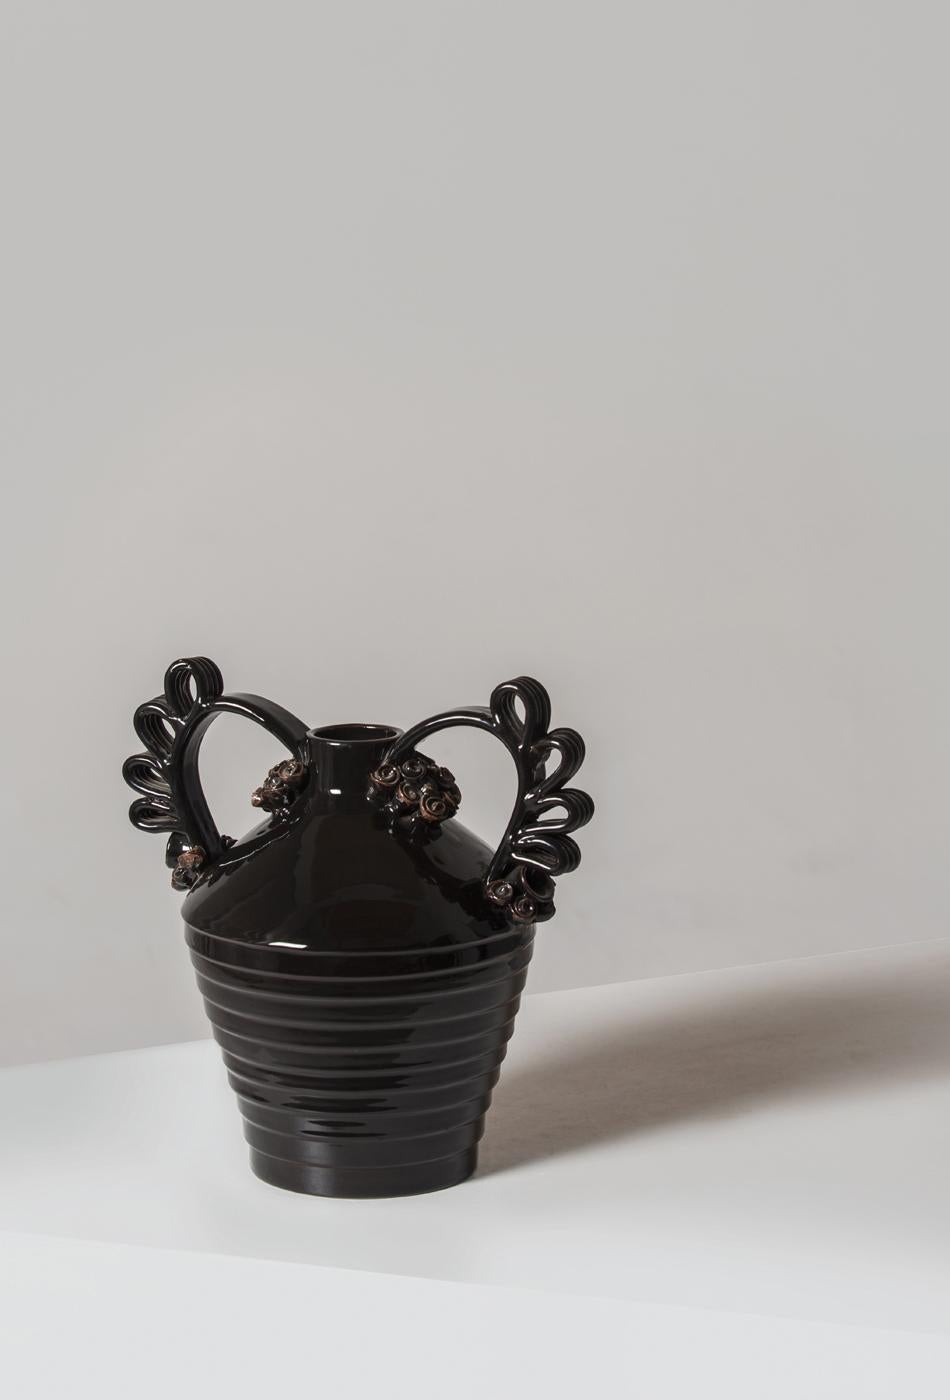 The Tunda vase is part of the collection 